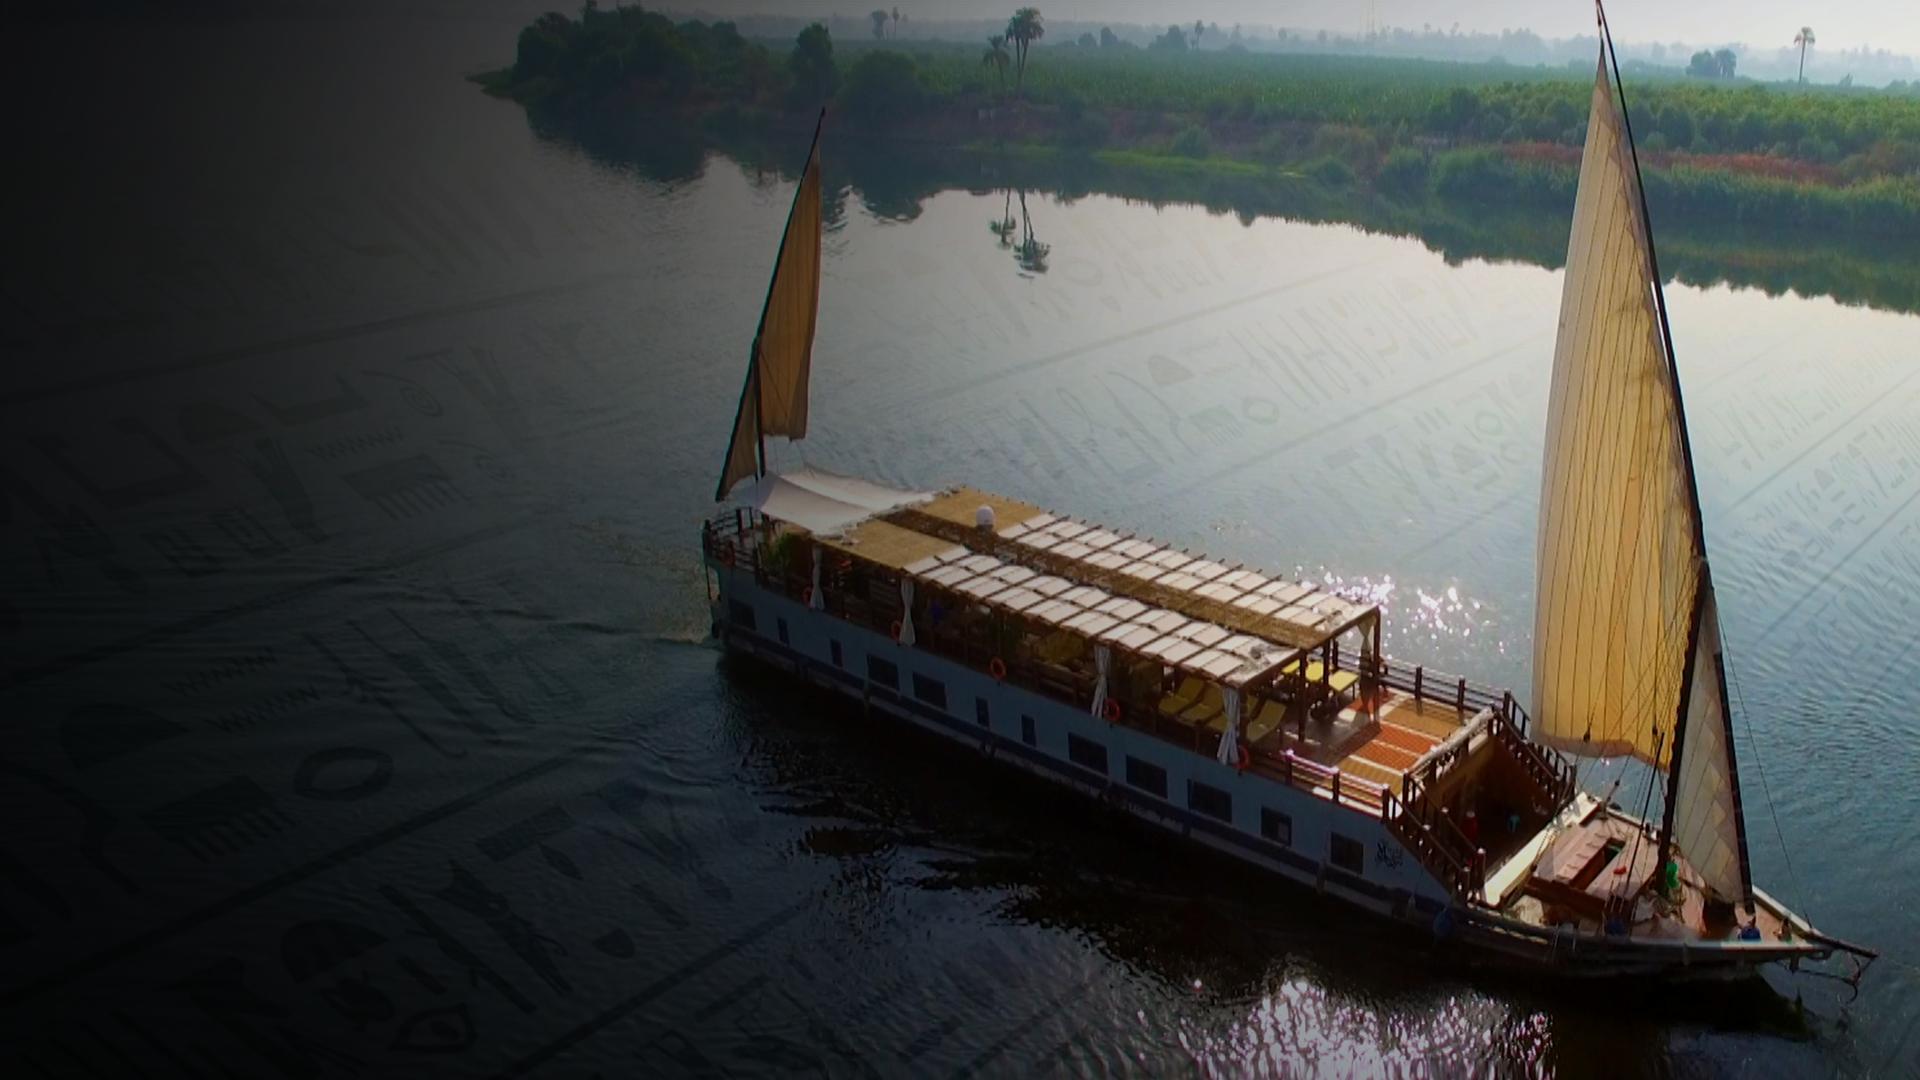 Nile: 5000 Years of History